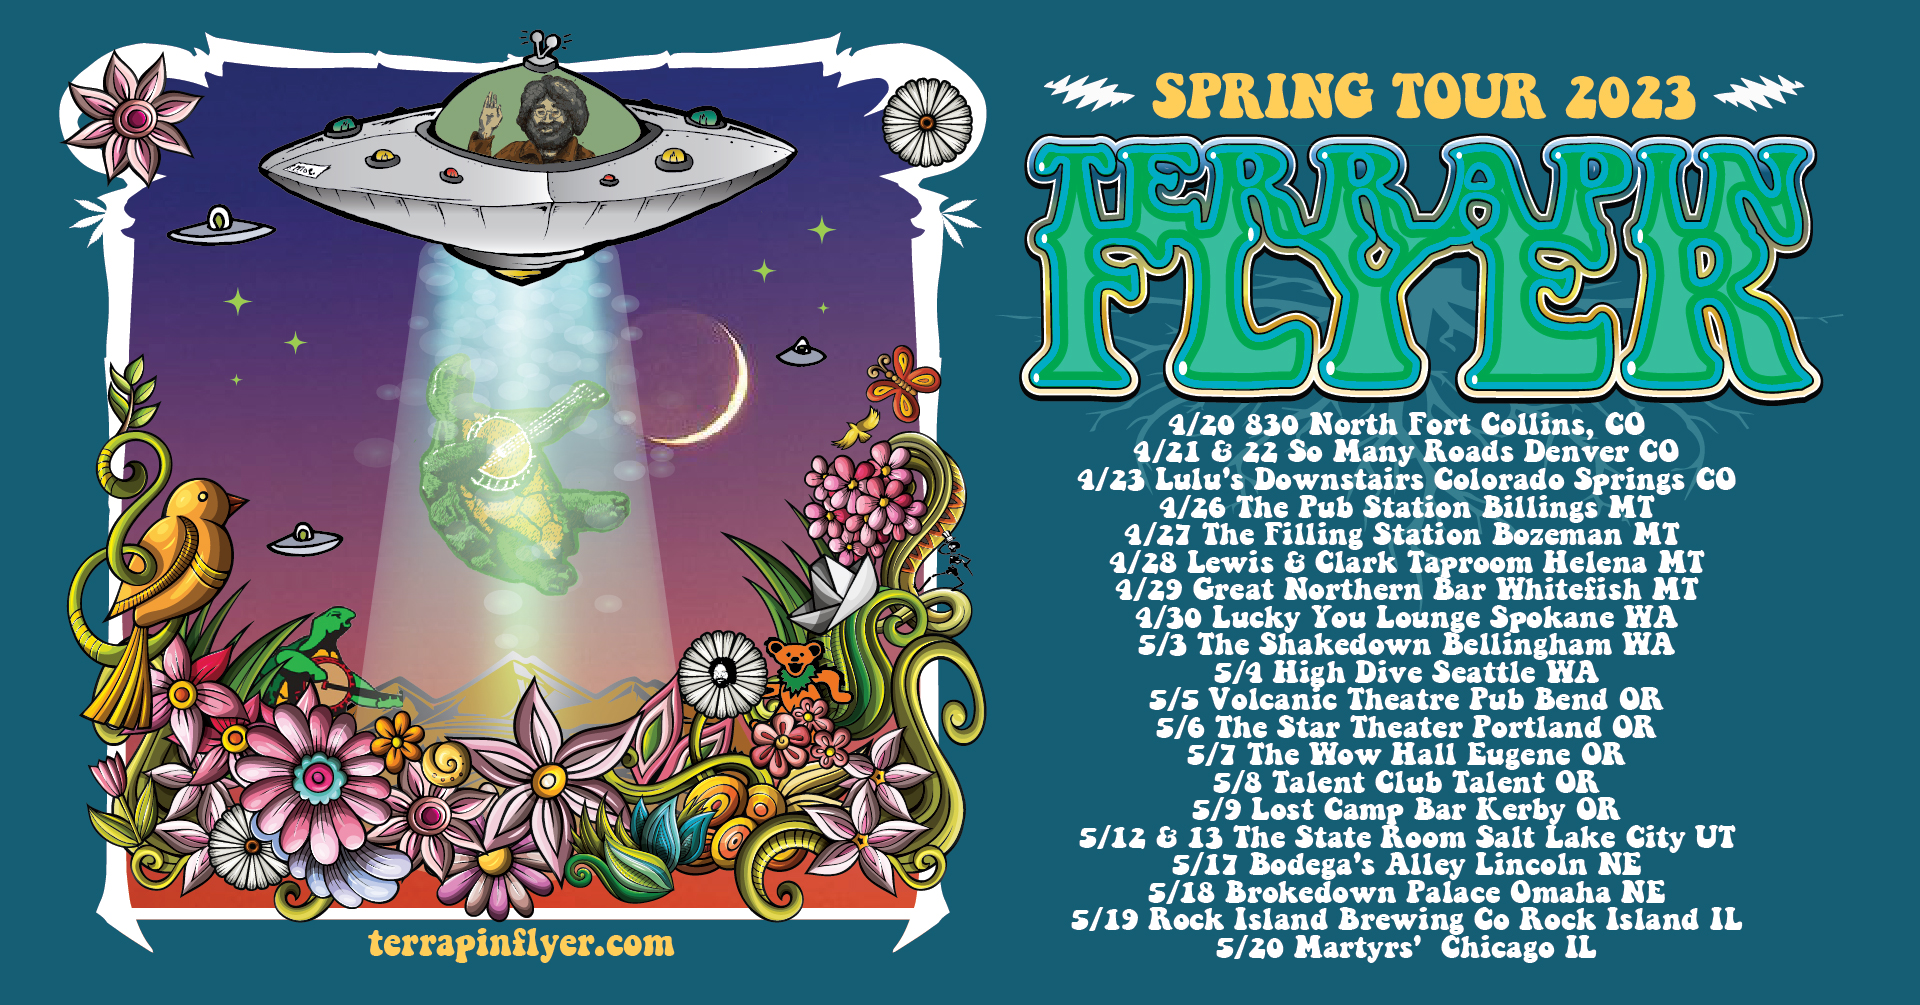 FROM CHICAGO TO THE COAST: TERRAPIN FLYER'S WESTERN WONDERLAND TOUR